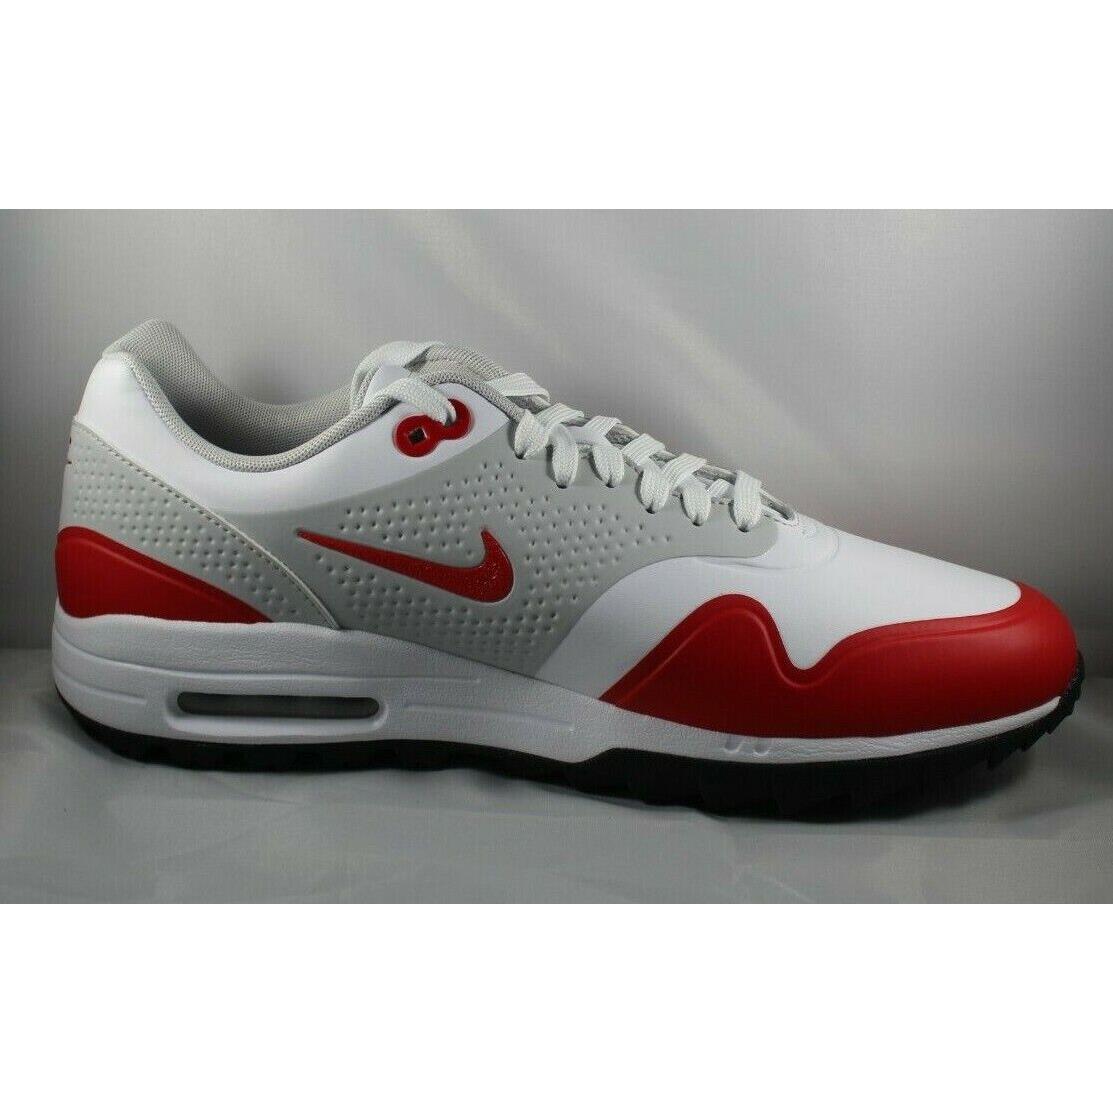 Nike shoes Air Max - Red , White/Neutral Grey/University Red/Black Manufacturer 4